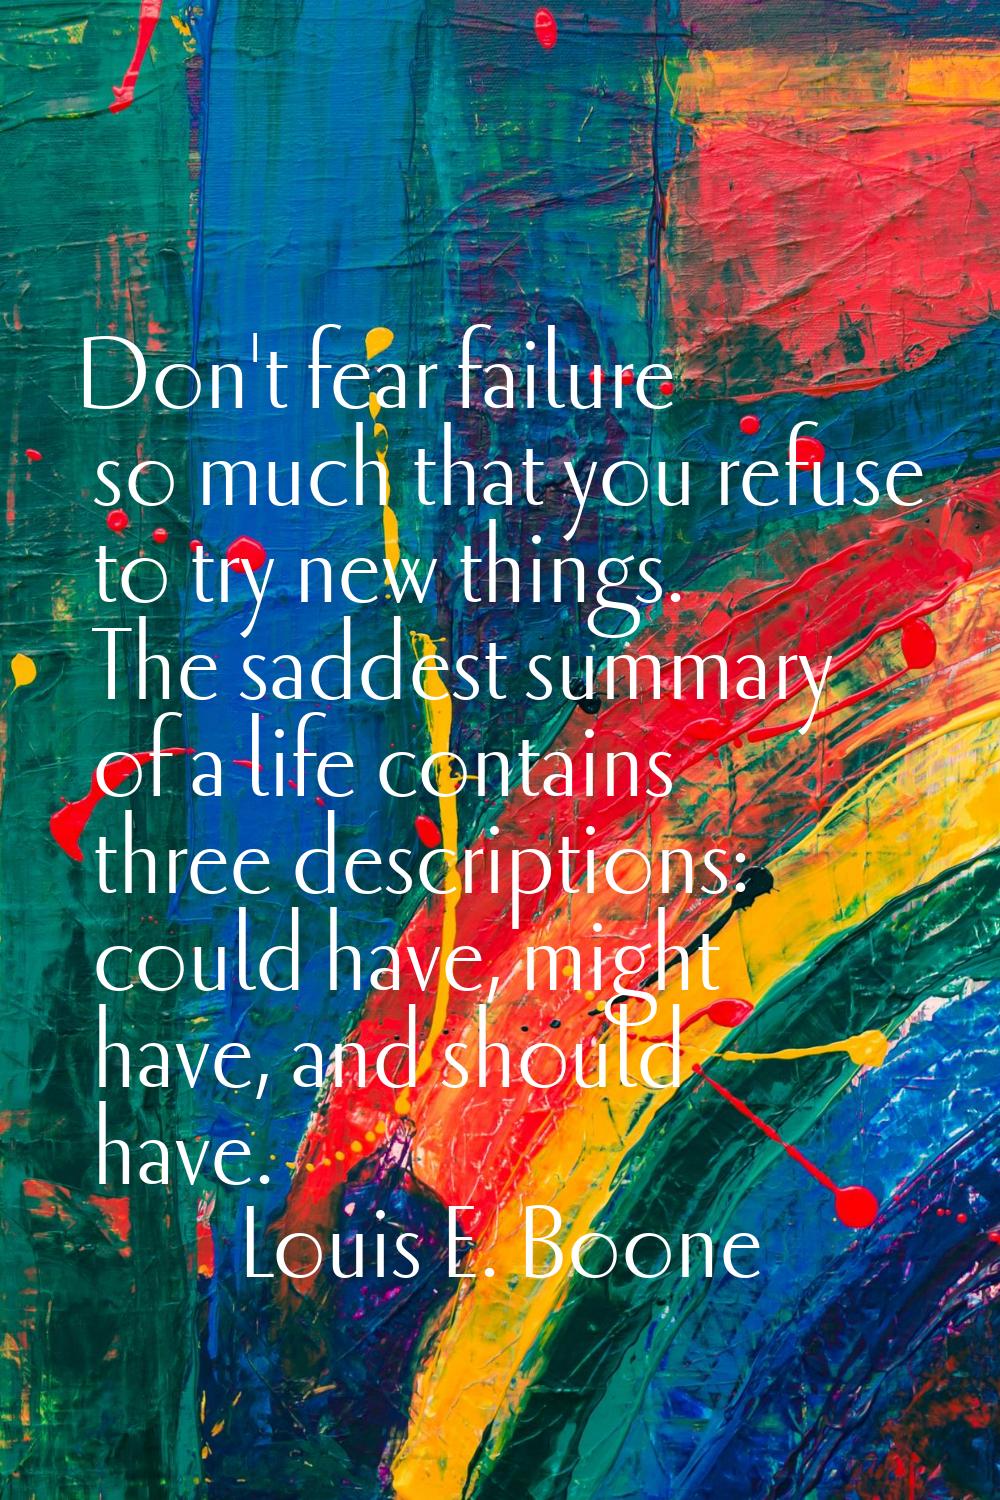 Don't fear failure so much that you refuse to try new things. The saddest summary of a life contain